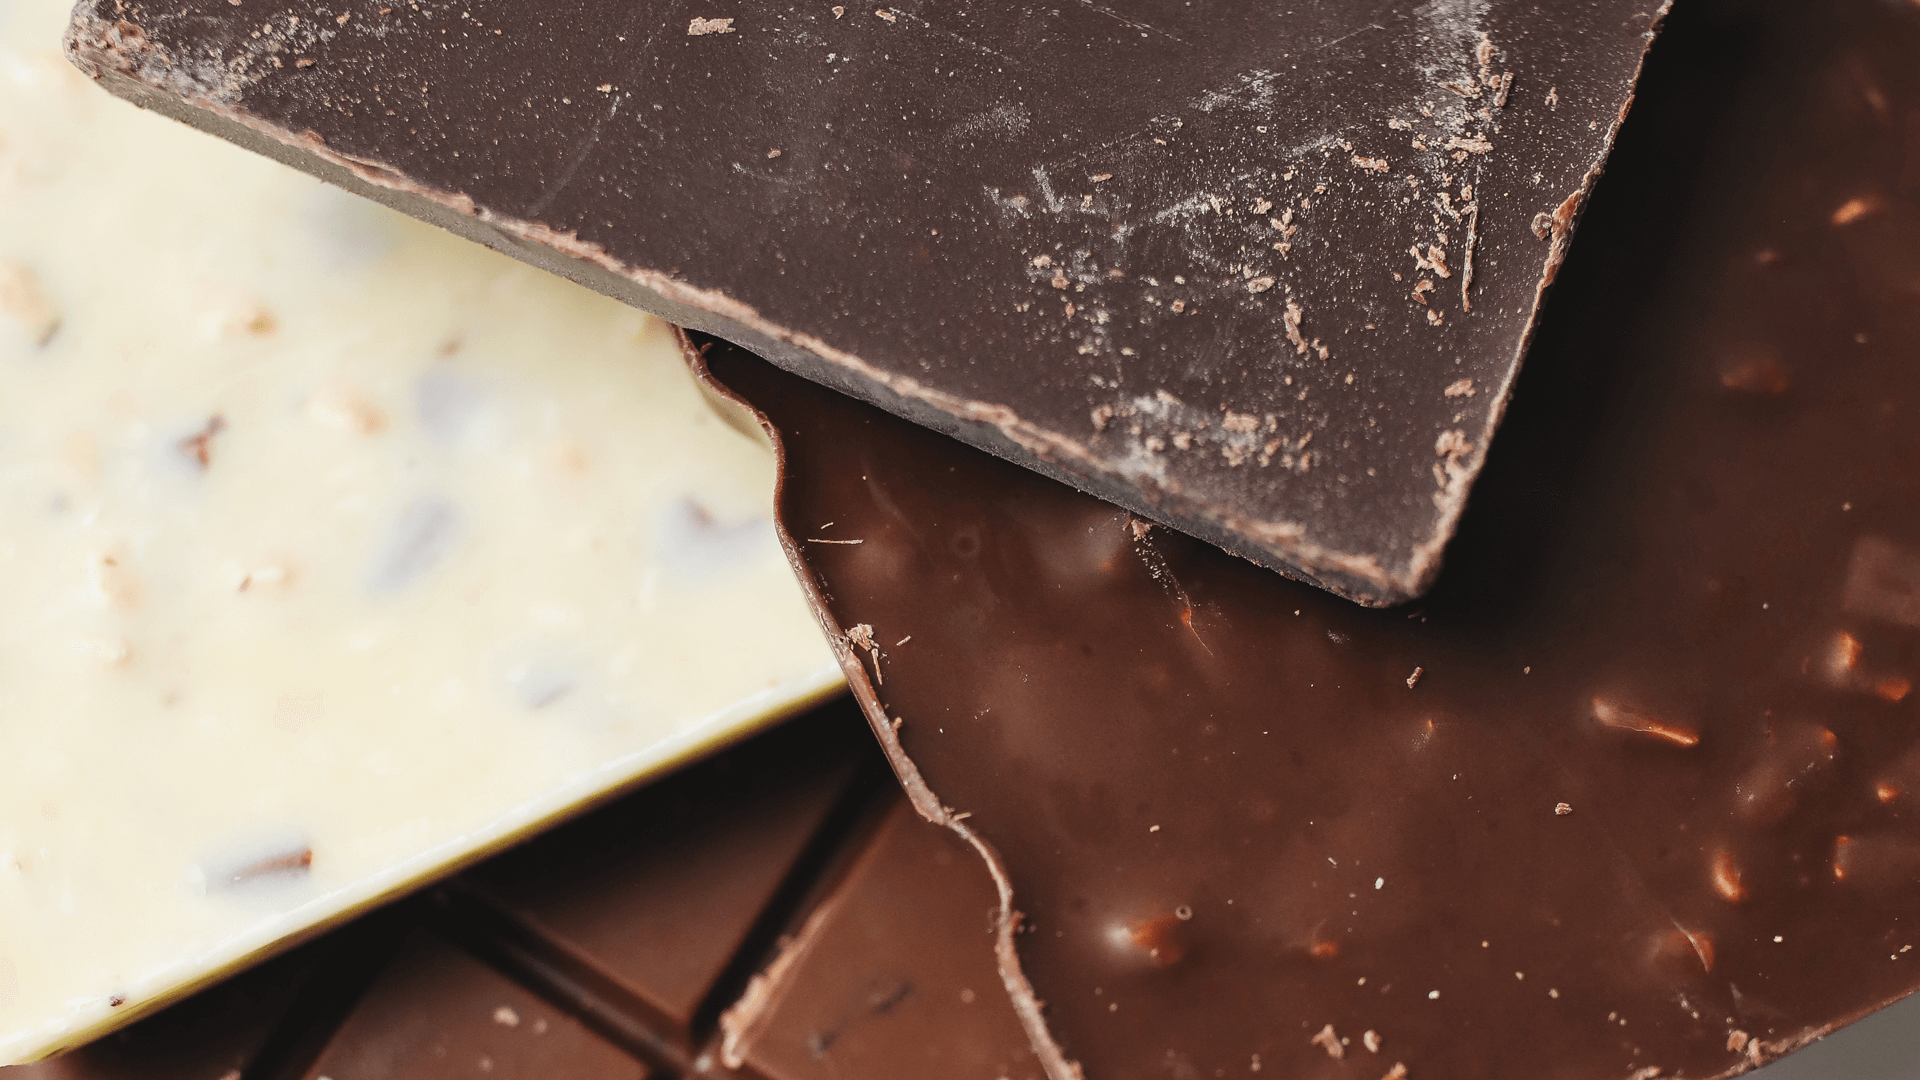 What makes Fairtrade chocolate taste even sweeter?